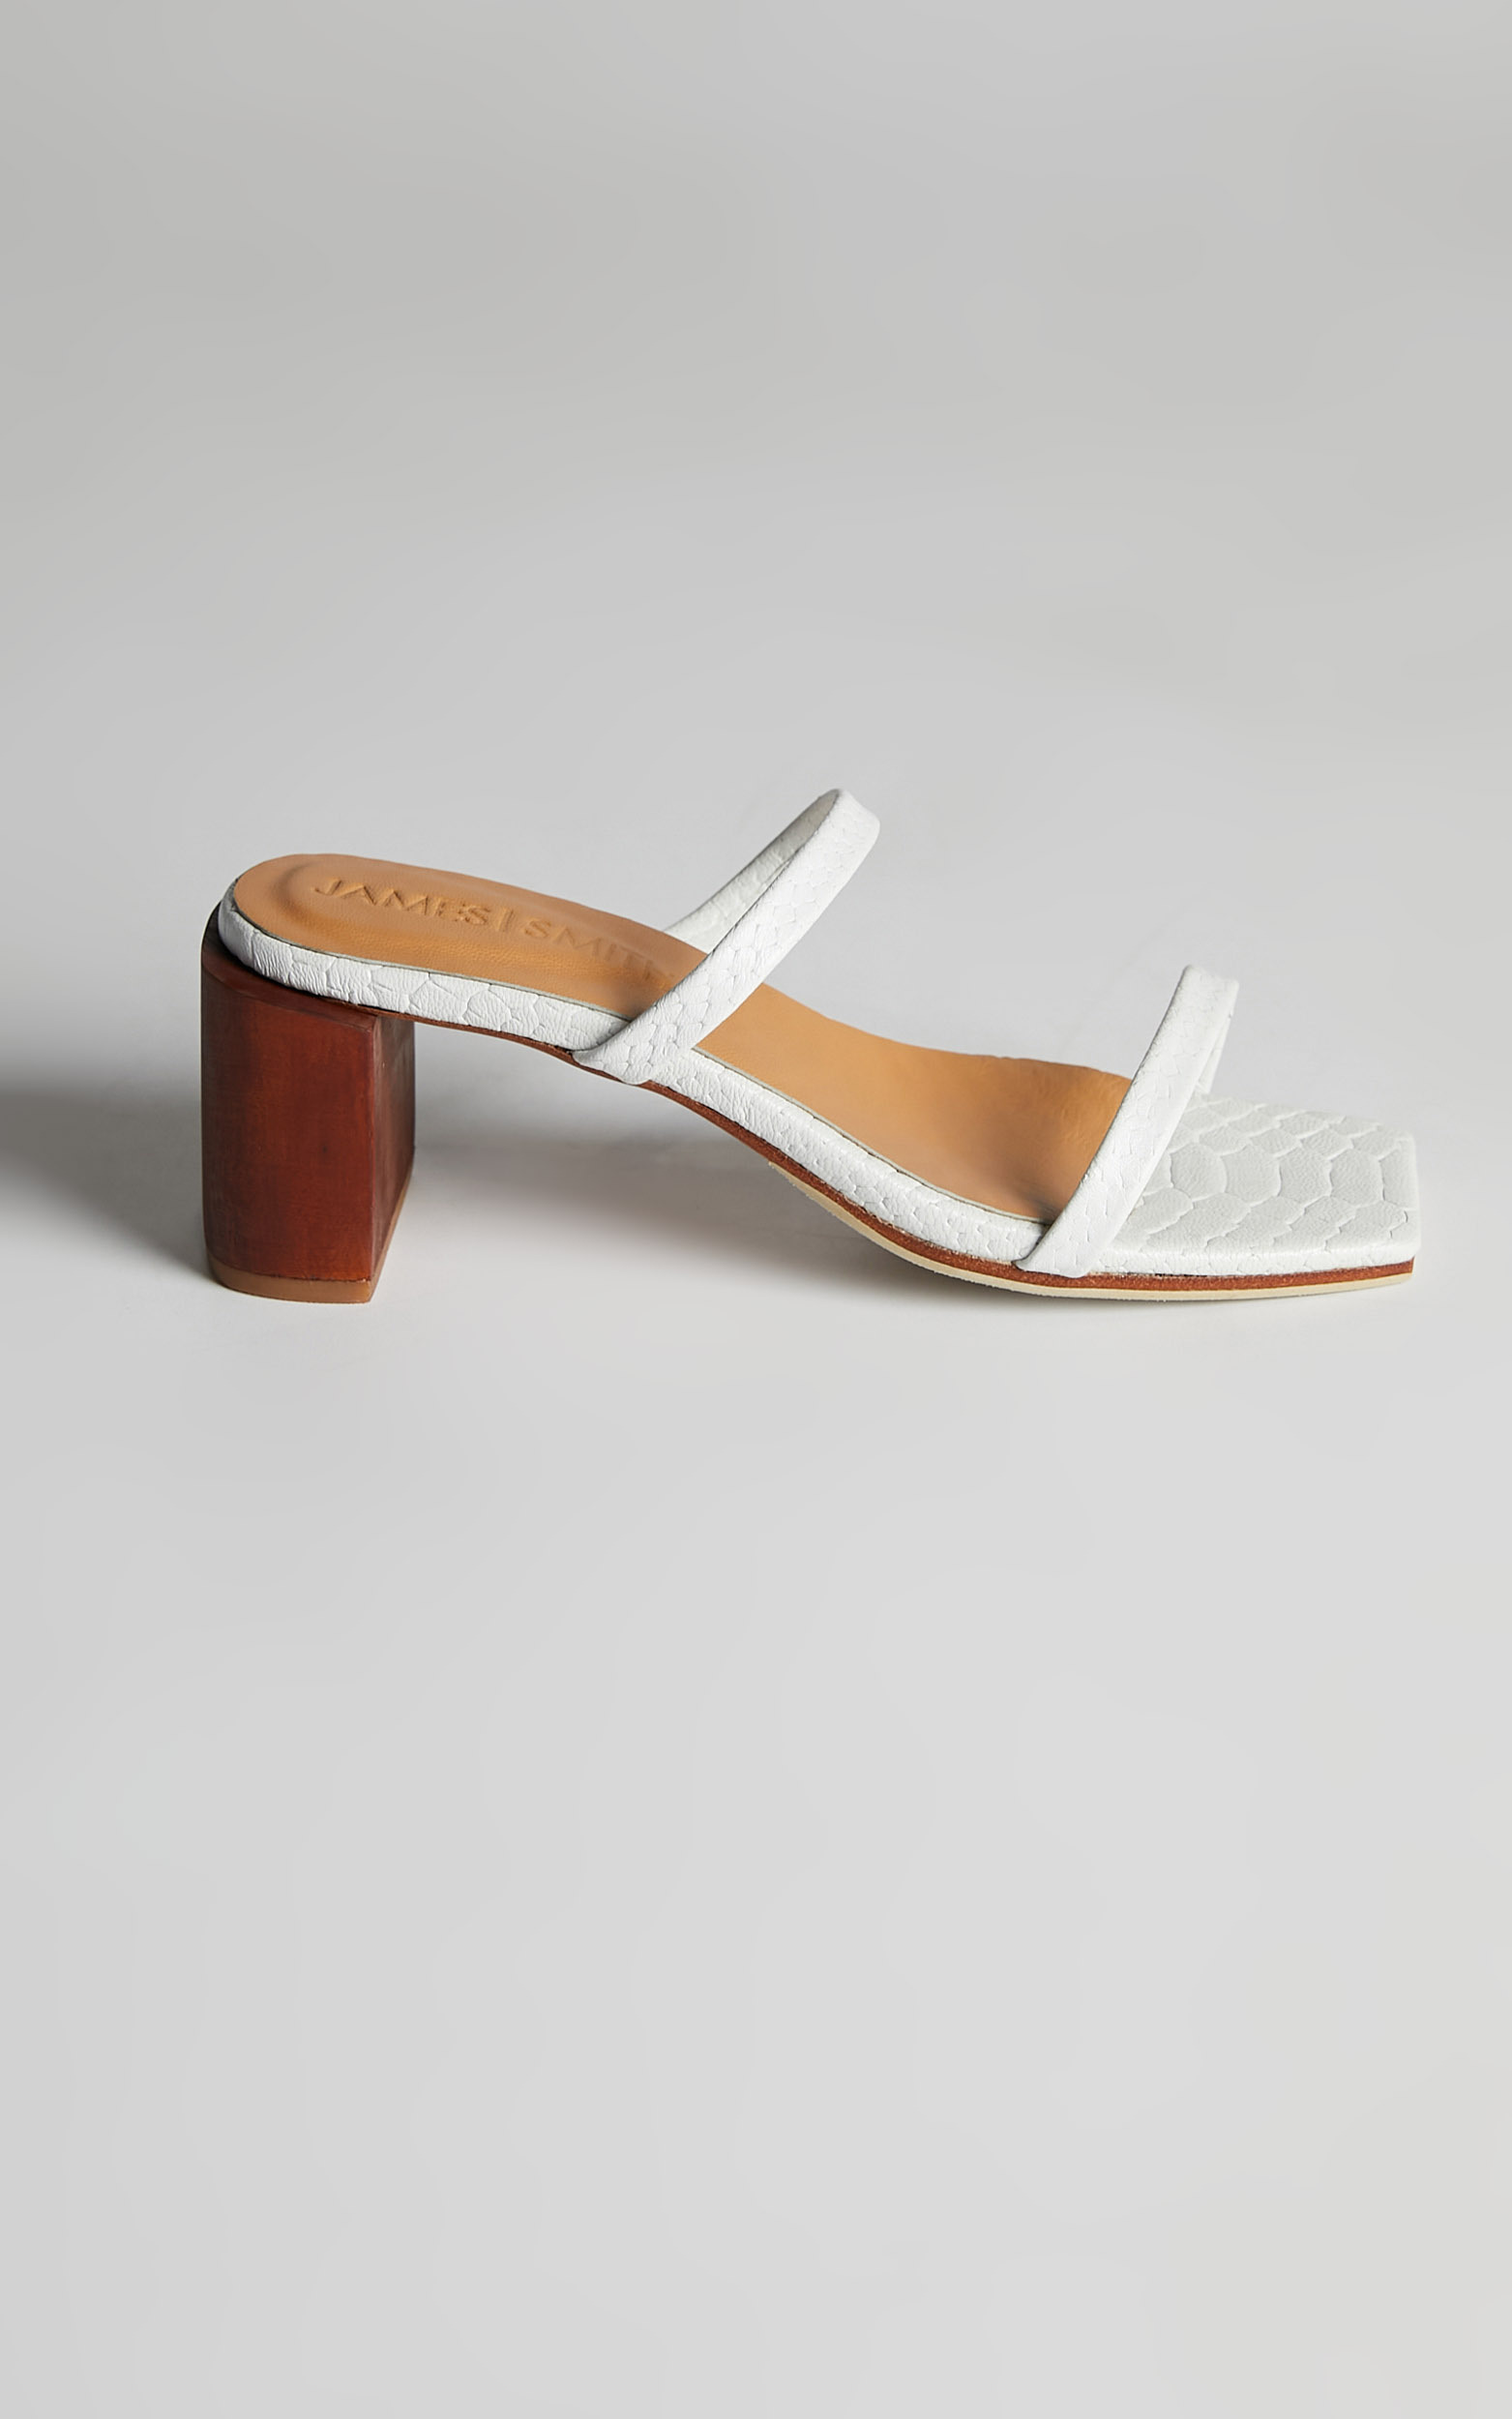 James Smith - Sirenuse Strap Sandal in White Croc - 05, WHT3, hi-res image number null